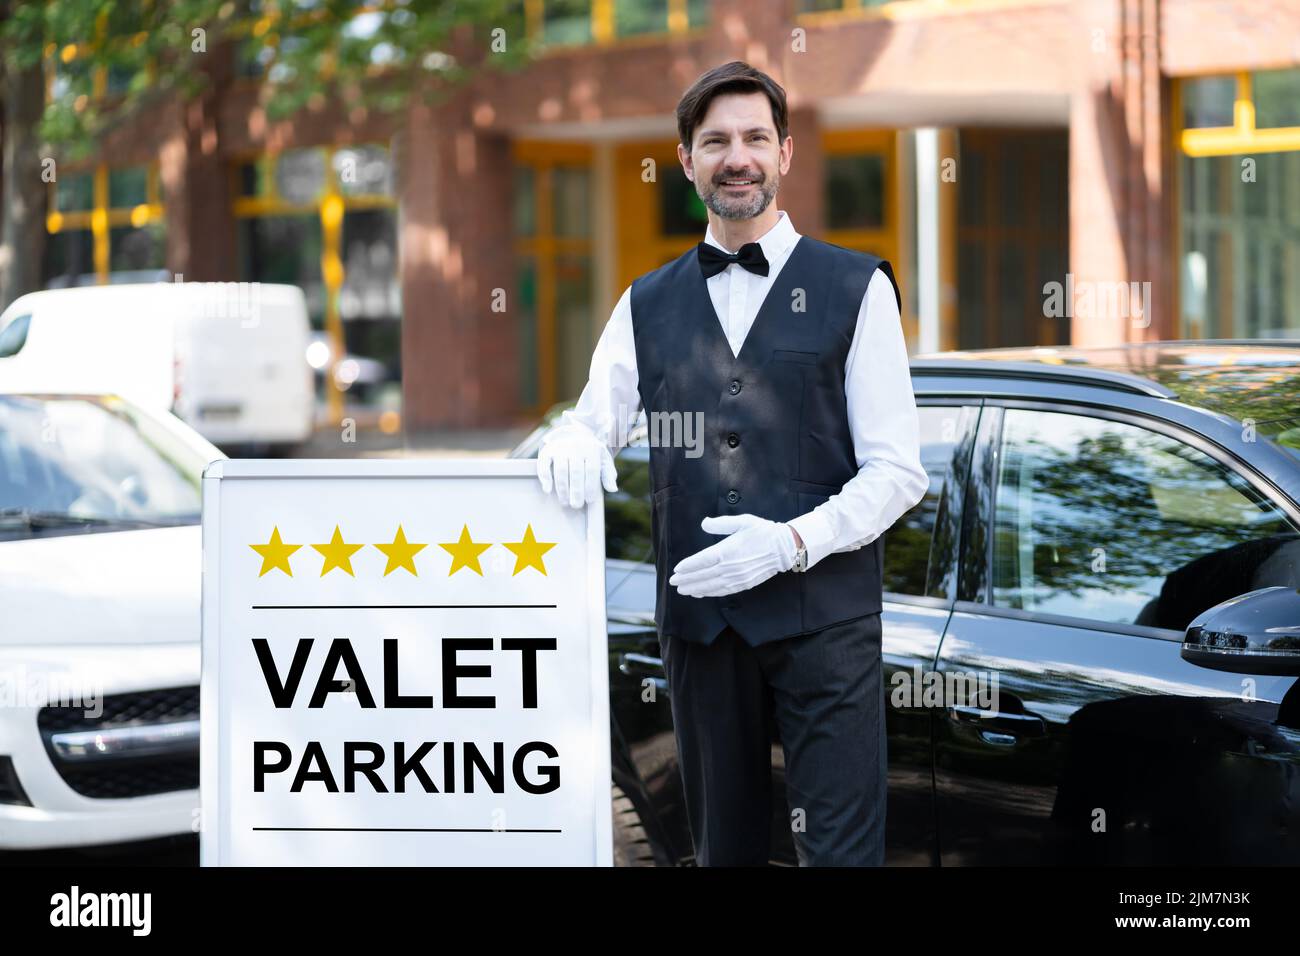 Valet Parking Hotel Service. Man Driver Standing Stock Photo